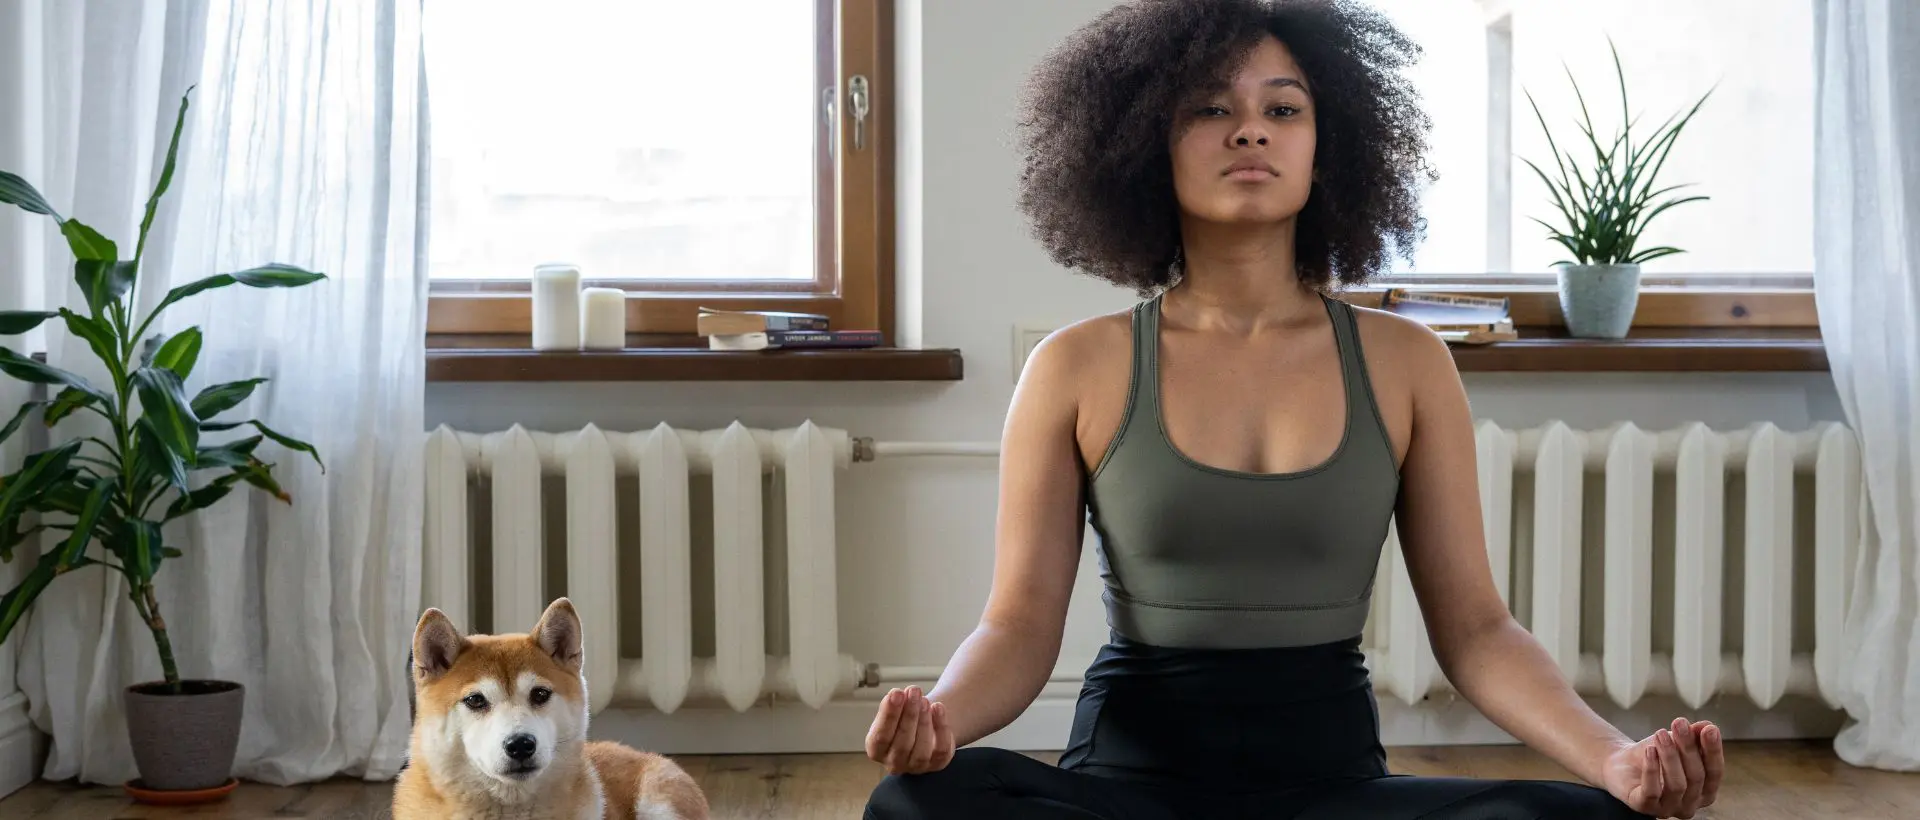 a woman sitting in a yoga pose with a dog.